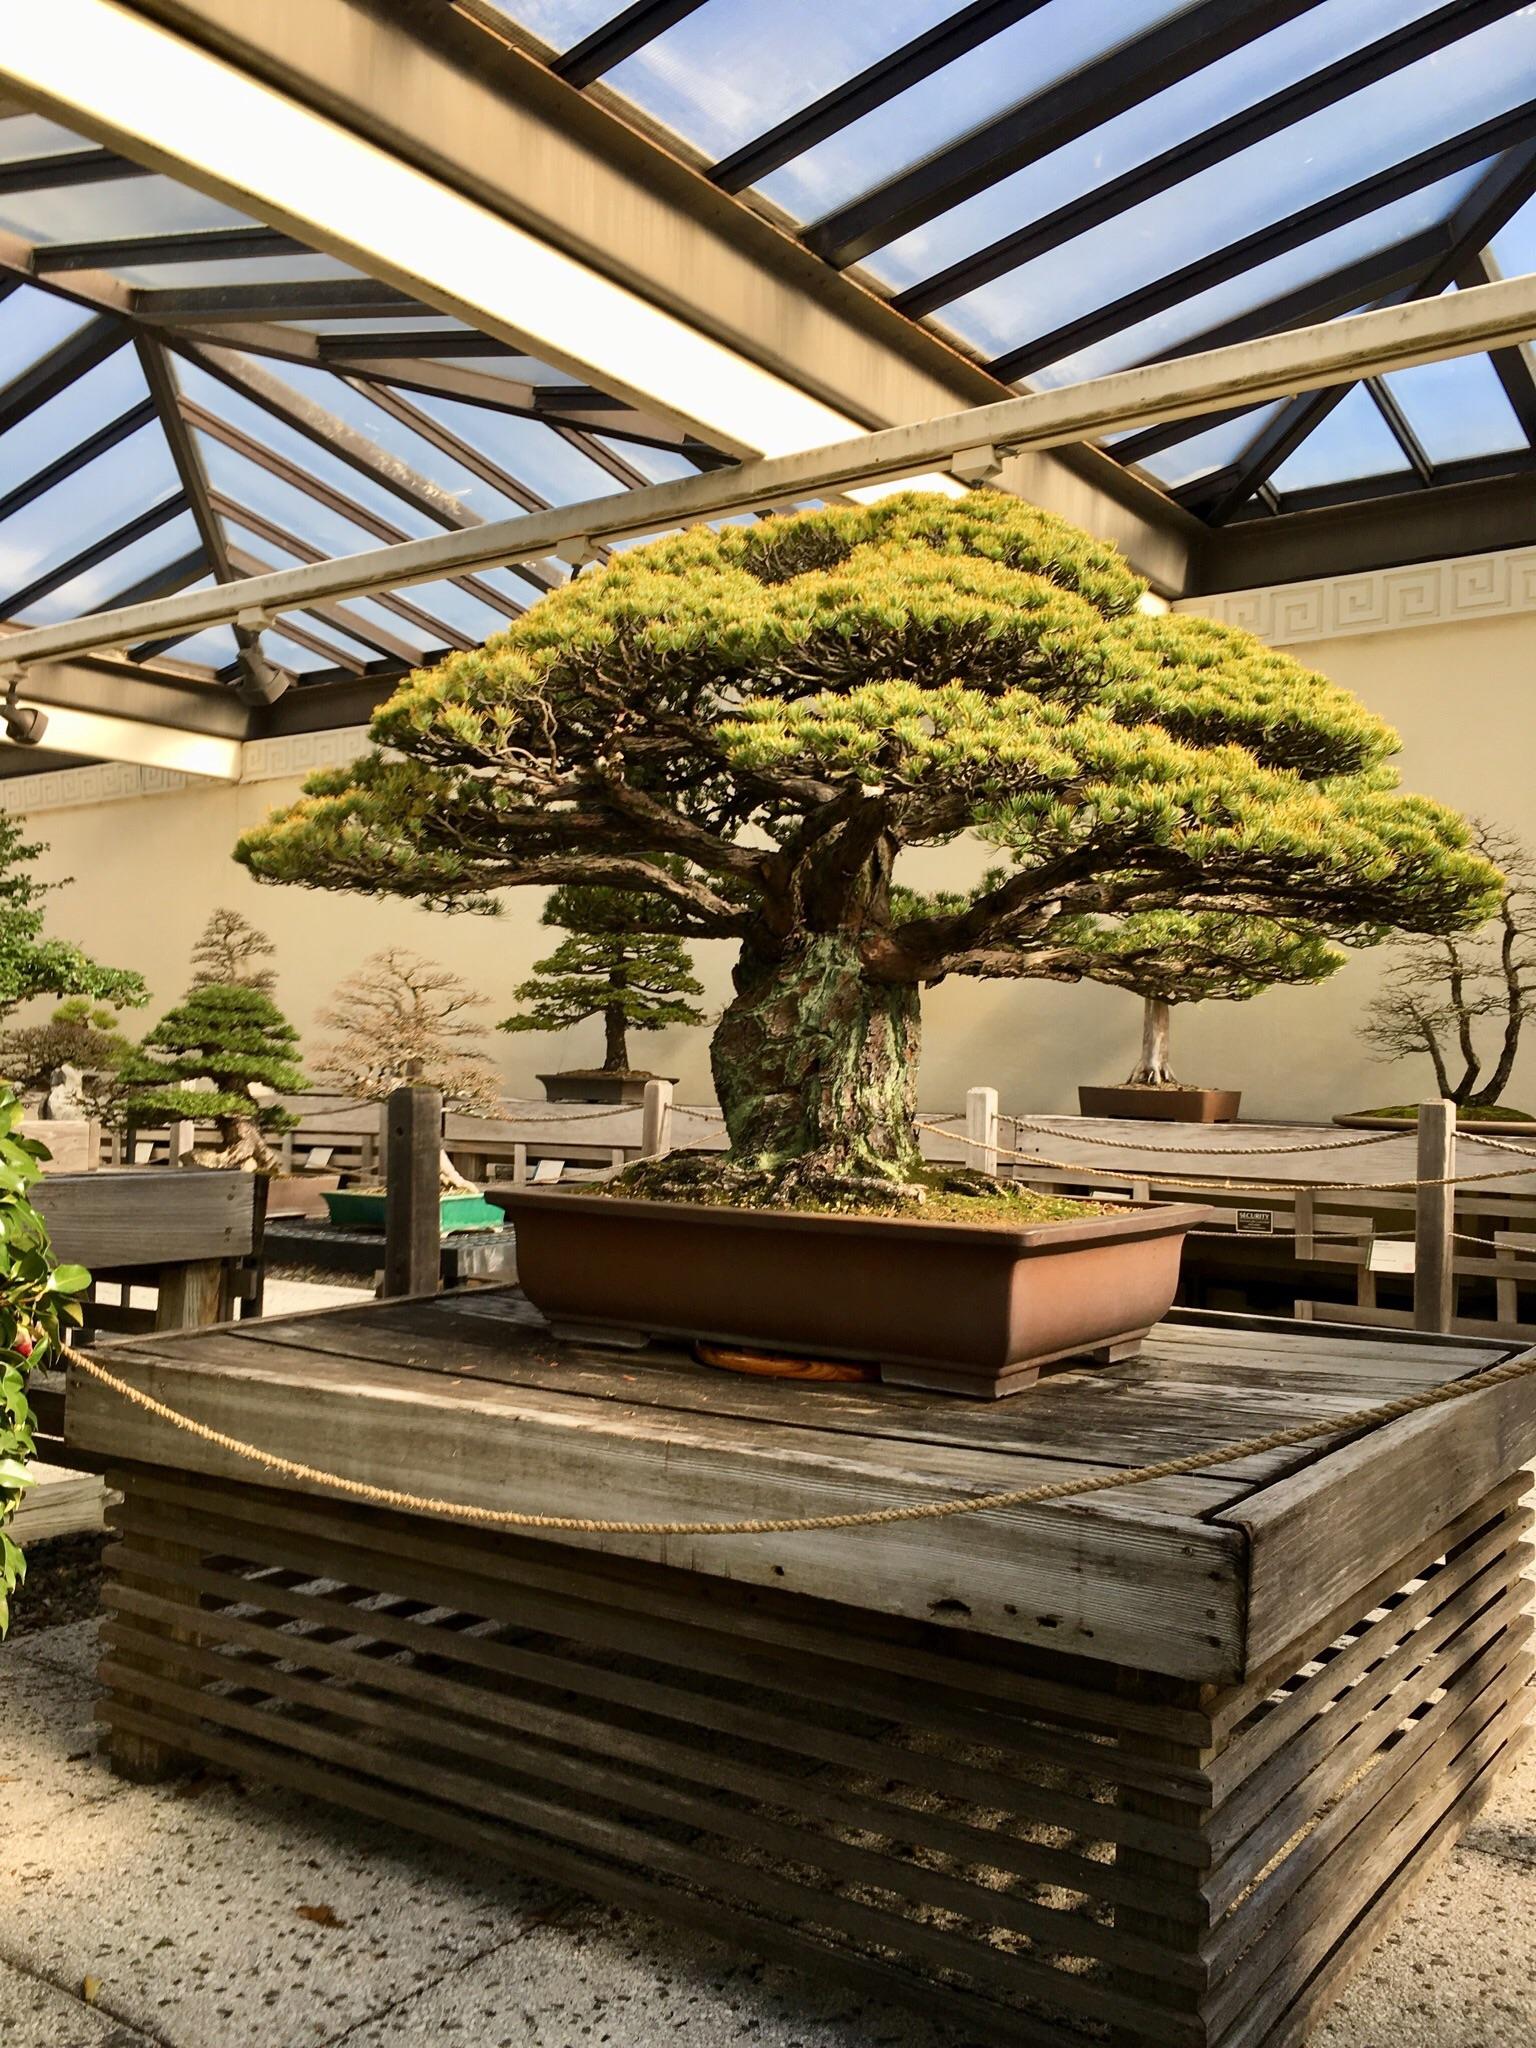 This 400 year old bonsai tree survived the bombing of Hiroshima in Japan.